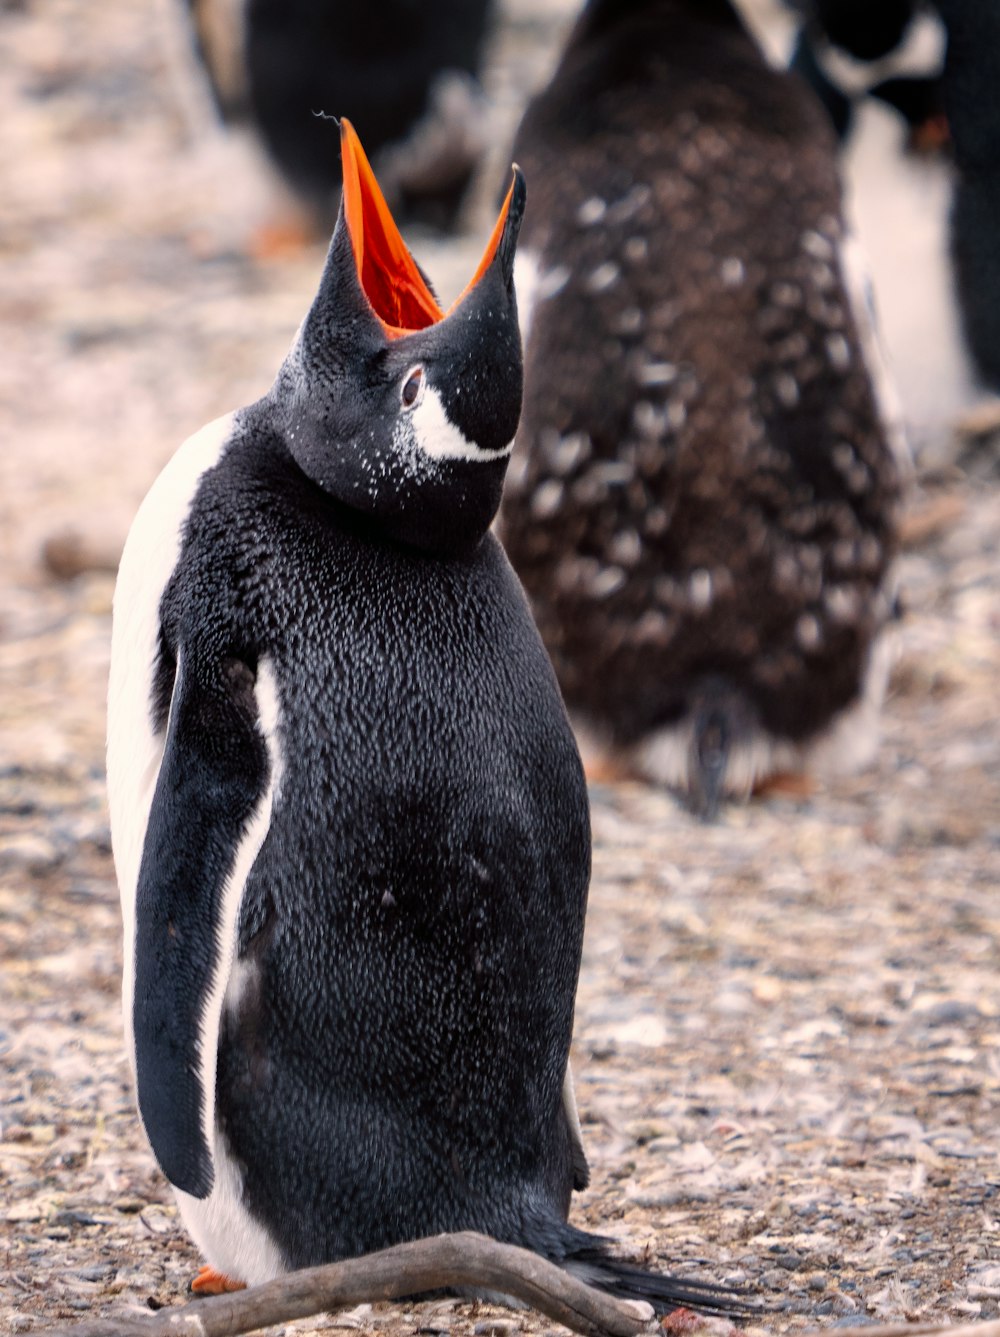 a penguin with an orange beak standing on the ground